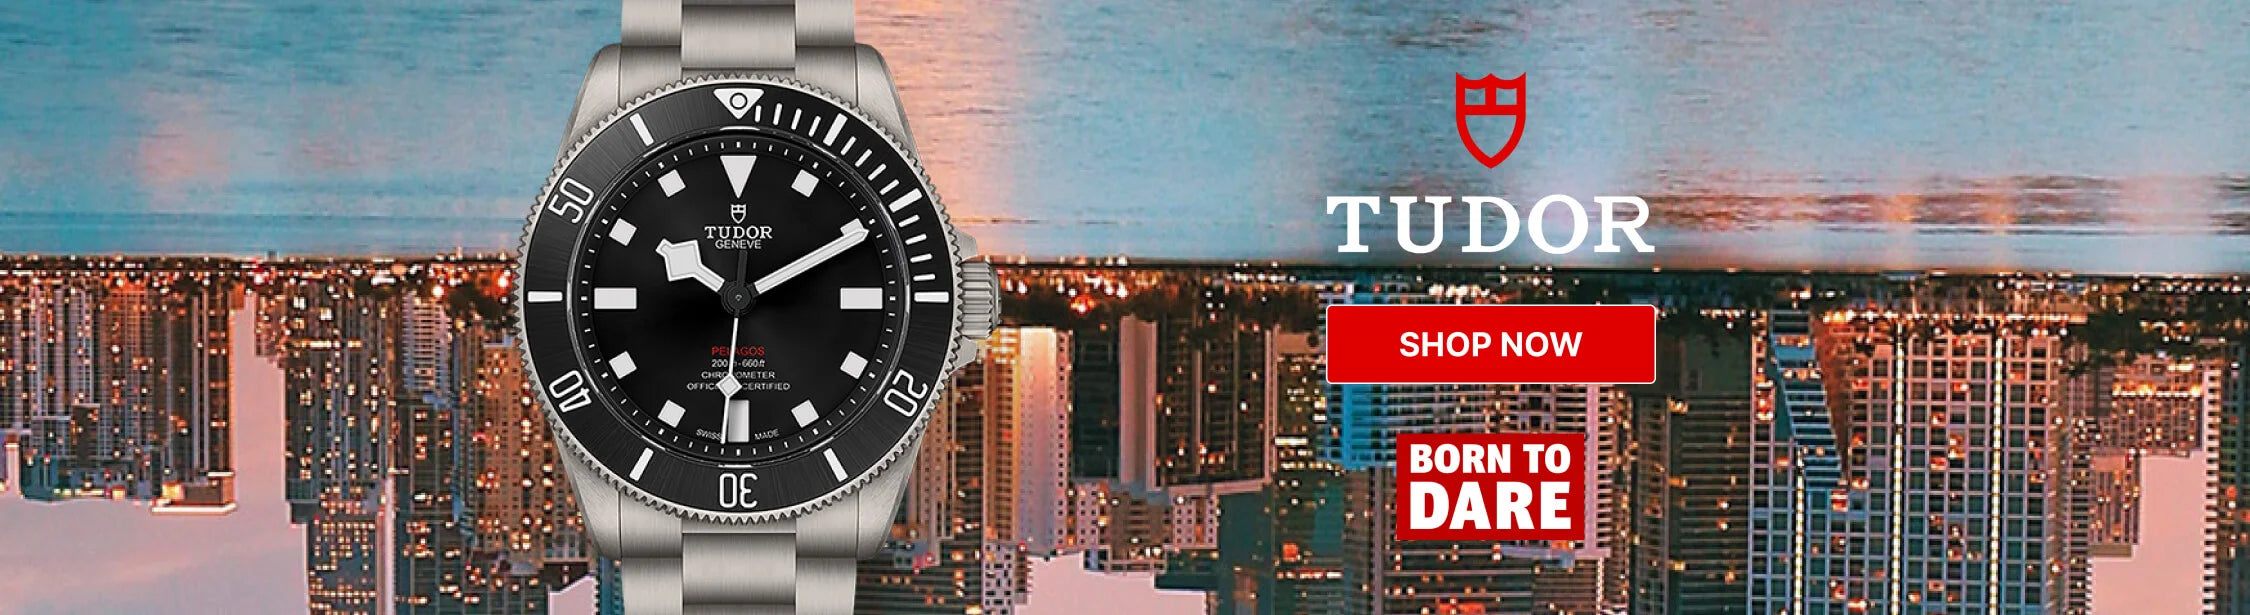 TUDOR watches at Orr's Jewelers in Pittsburgh, PA